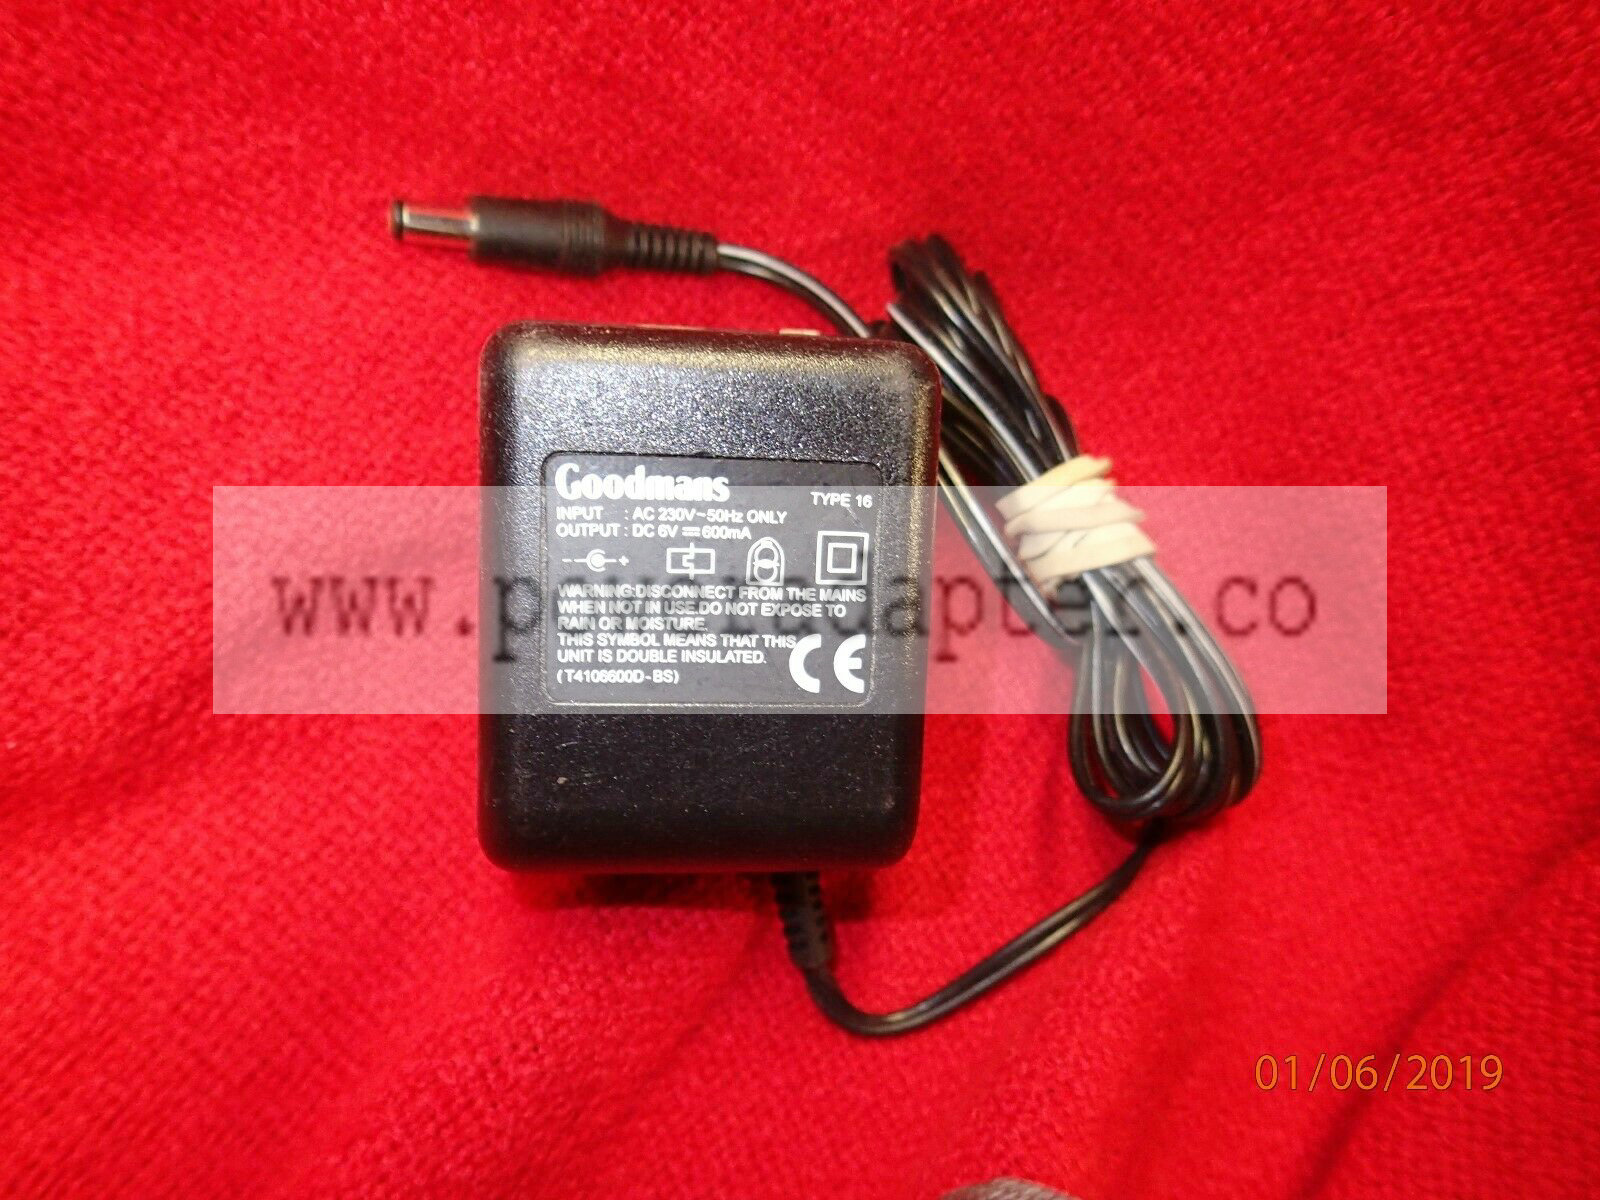 GOODMANS POWER ADAPTER TYPE 16 6V 600mA T4106600D-BS input: 230v Ac 50hz only output:DC 600ma 6V P/N: T4106600D-B